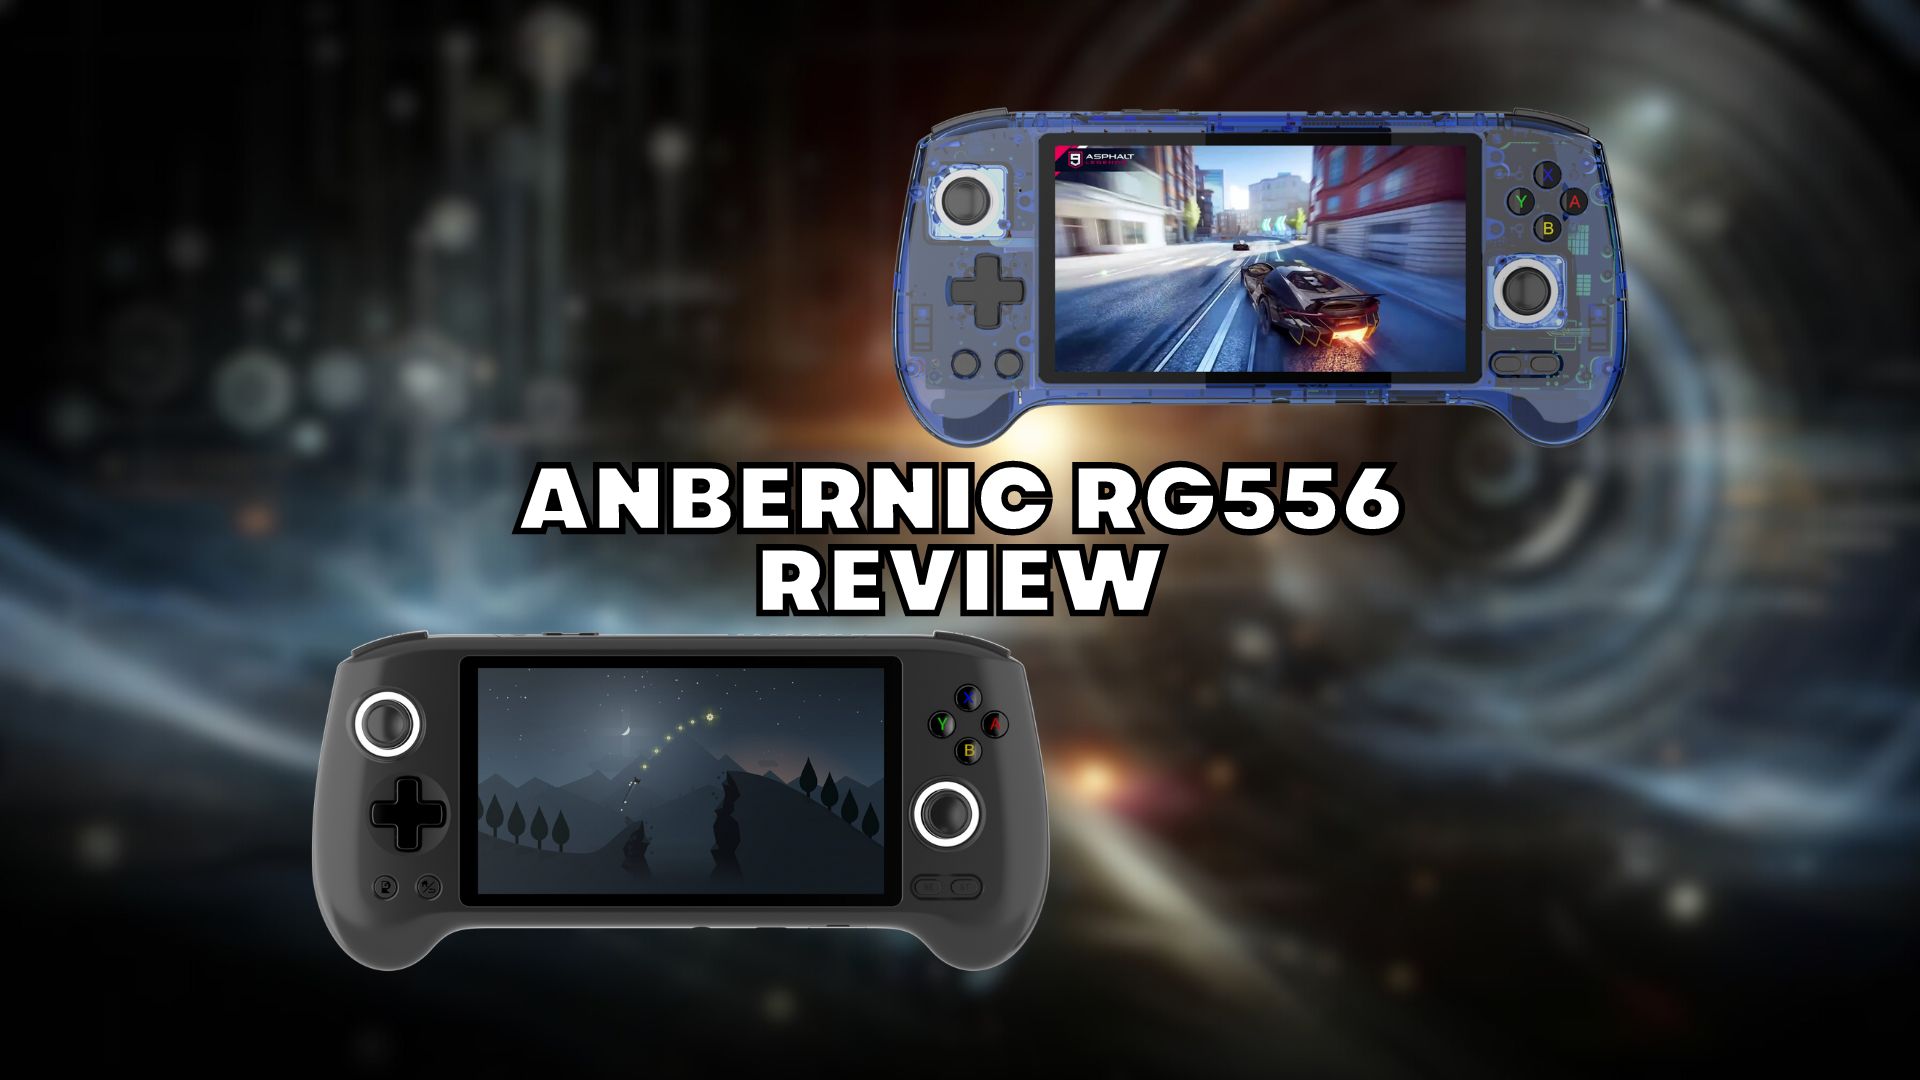 Anbernic RG556 review – Android gaming handheld with AMOLED screen